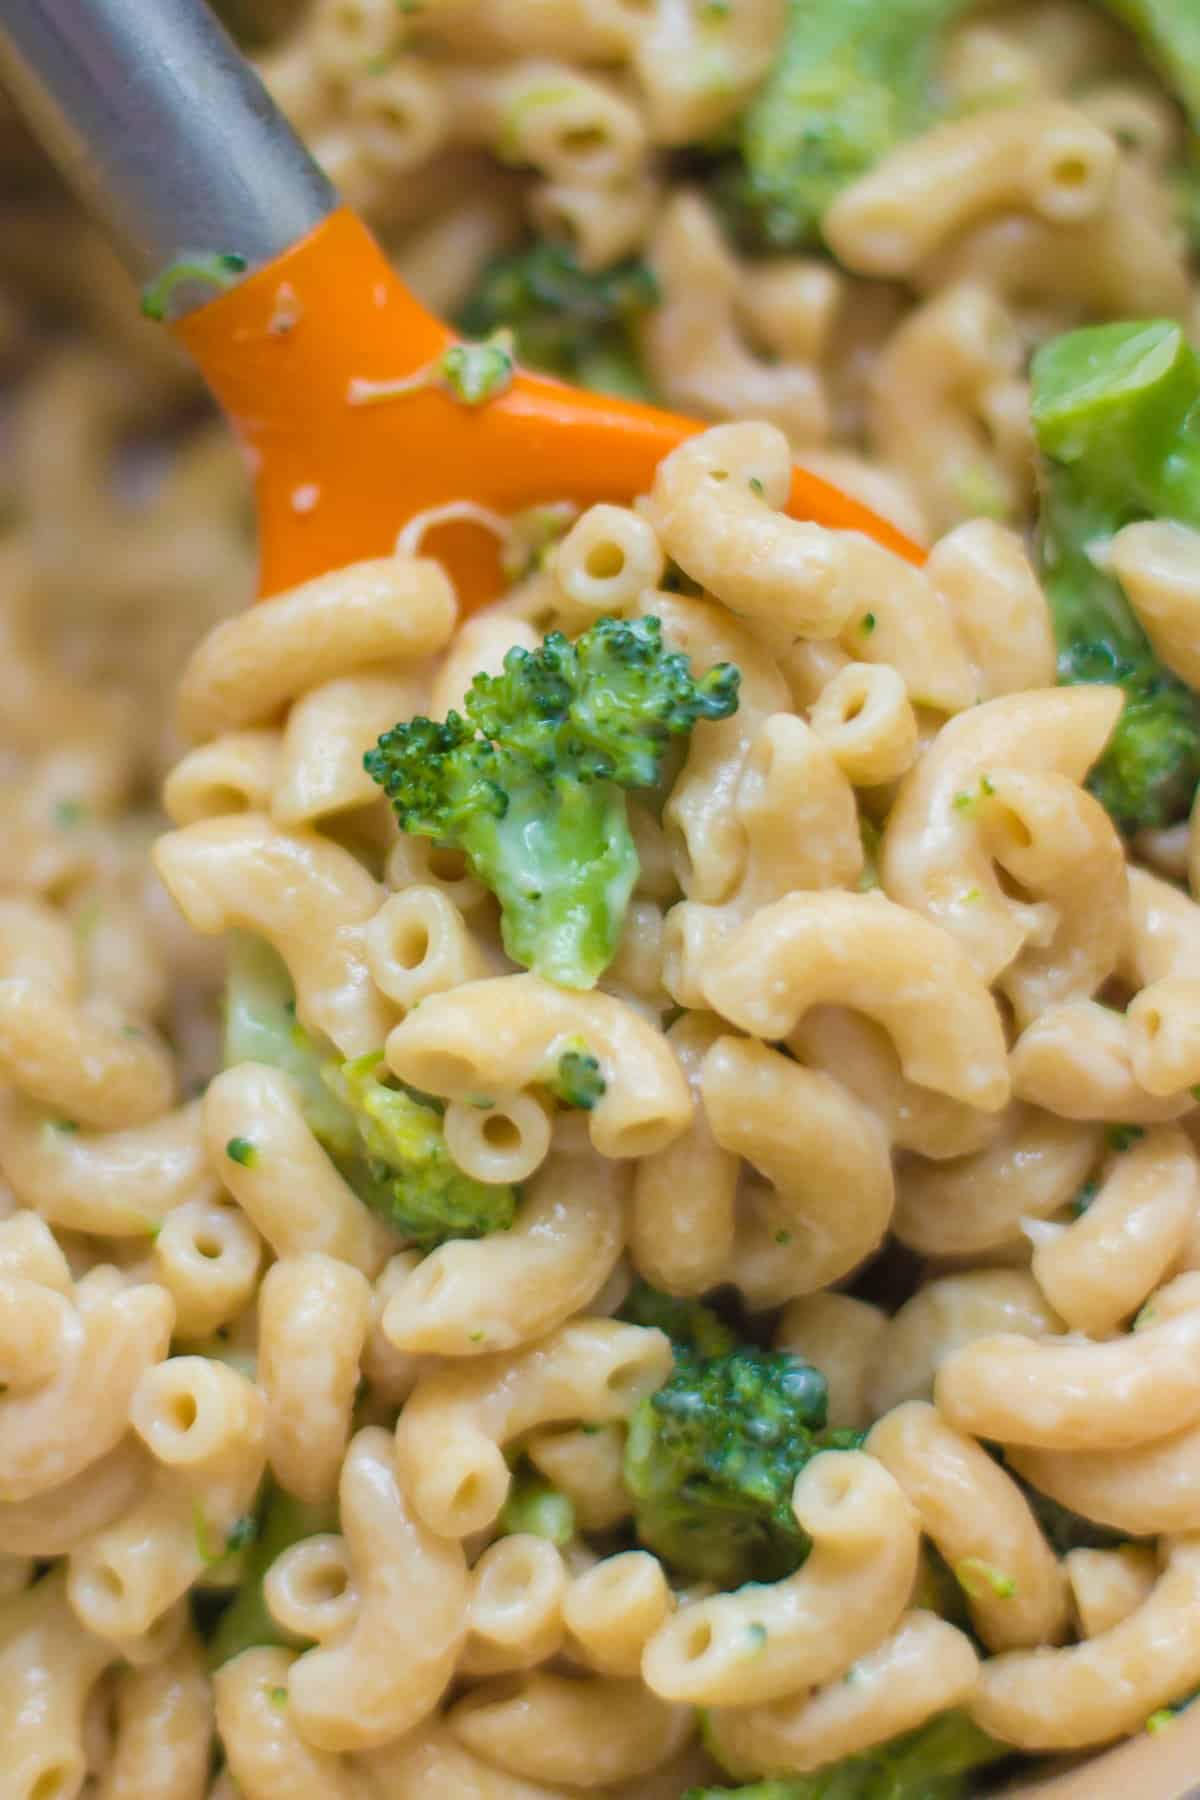 A close up shot of scooped broccoli pasta.